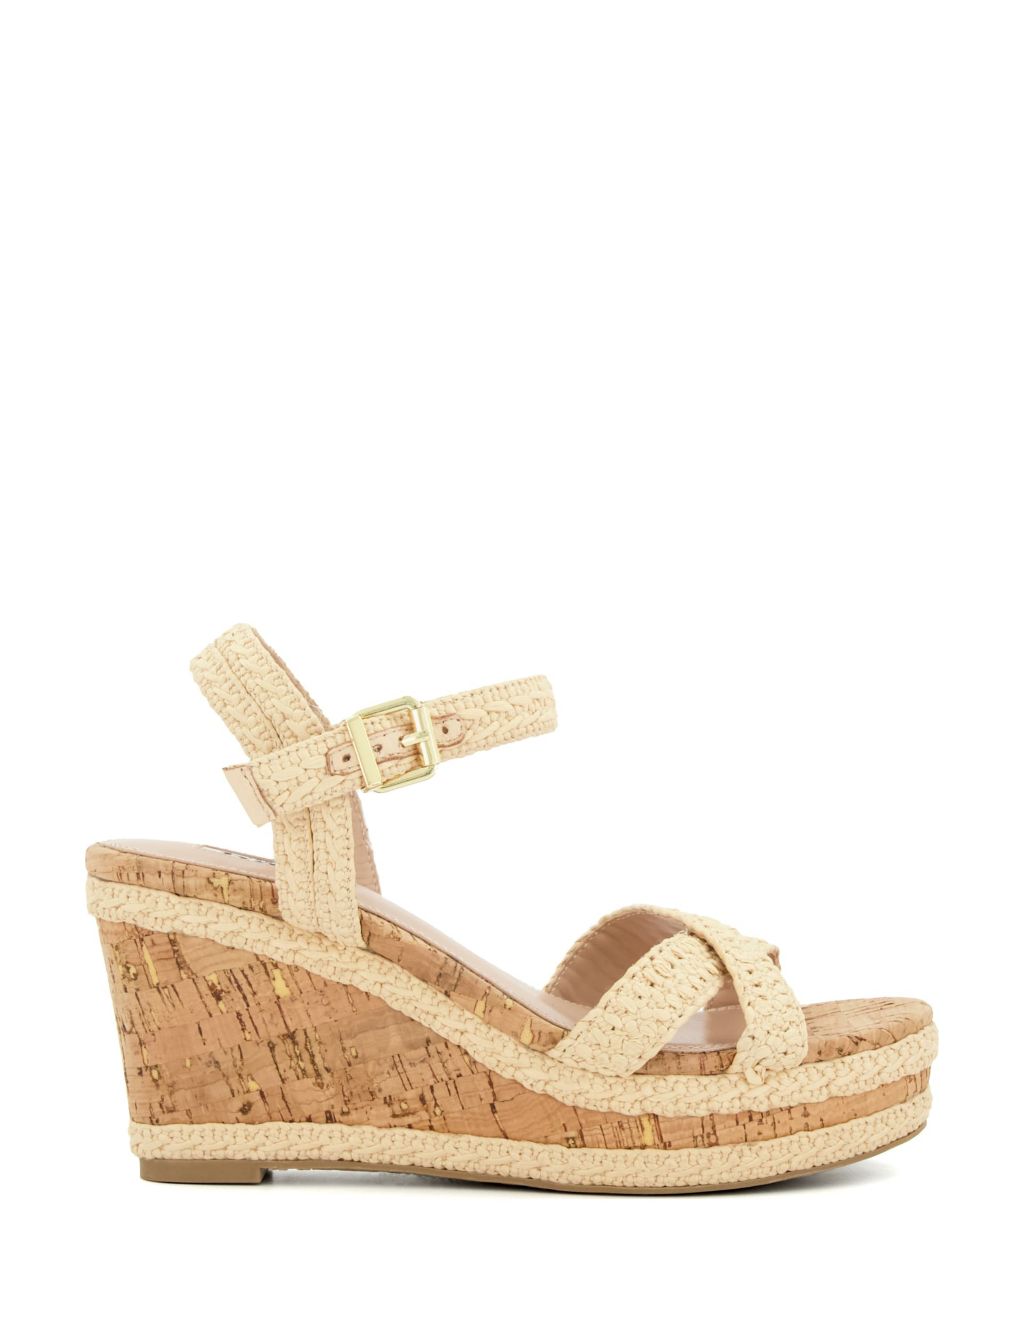 Woven Crossover Ankle Strap Wedge Sandals